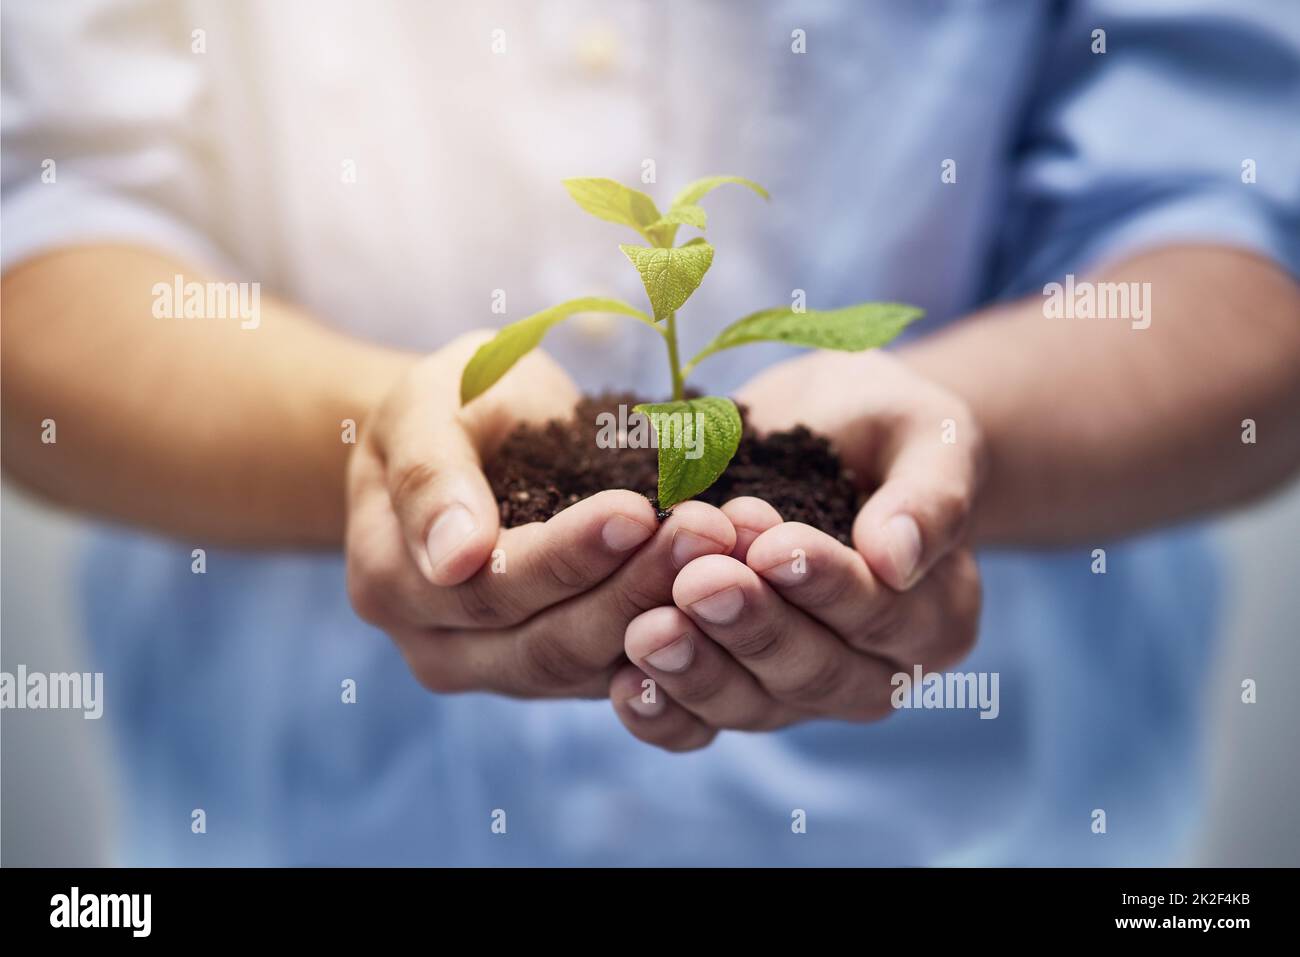 Growth and progress. Shot of hands holding a pile of soil with a plant in. Stock Photo